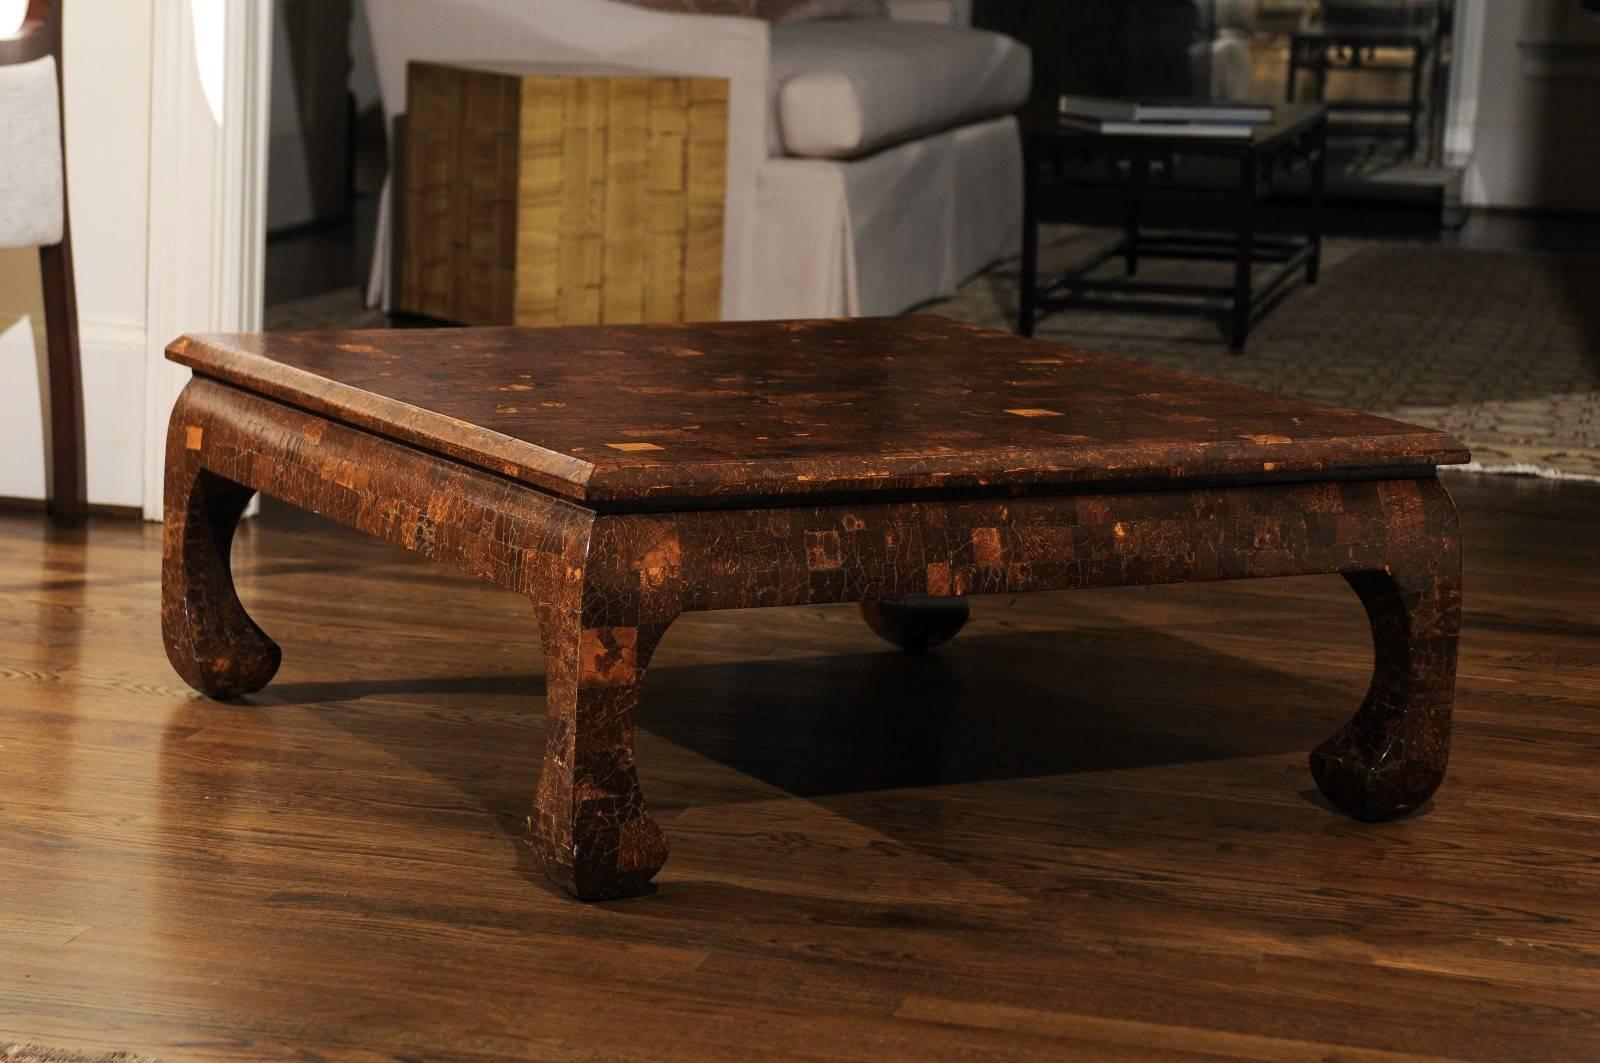 A stunning restored organic coffee table, circa 1980.  Heavy, expertly crafted solid Mahogany form veneered in Coconut shell and sealed in a lacquer finish.  A piece specifically designed to anchor an important space.  While unmarked, the table is